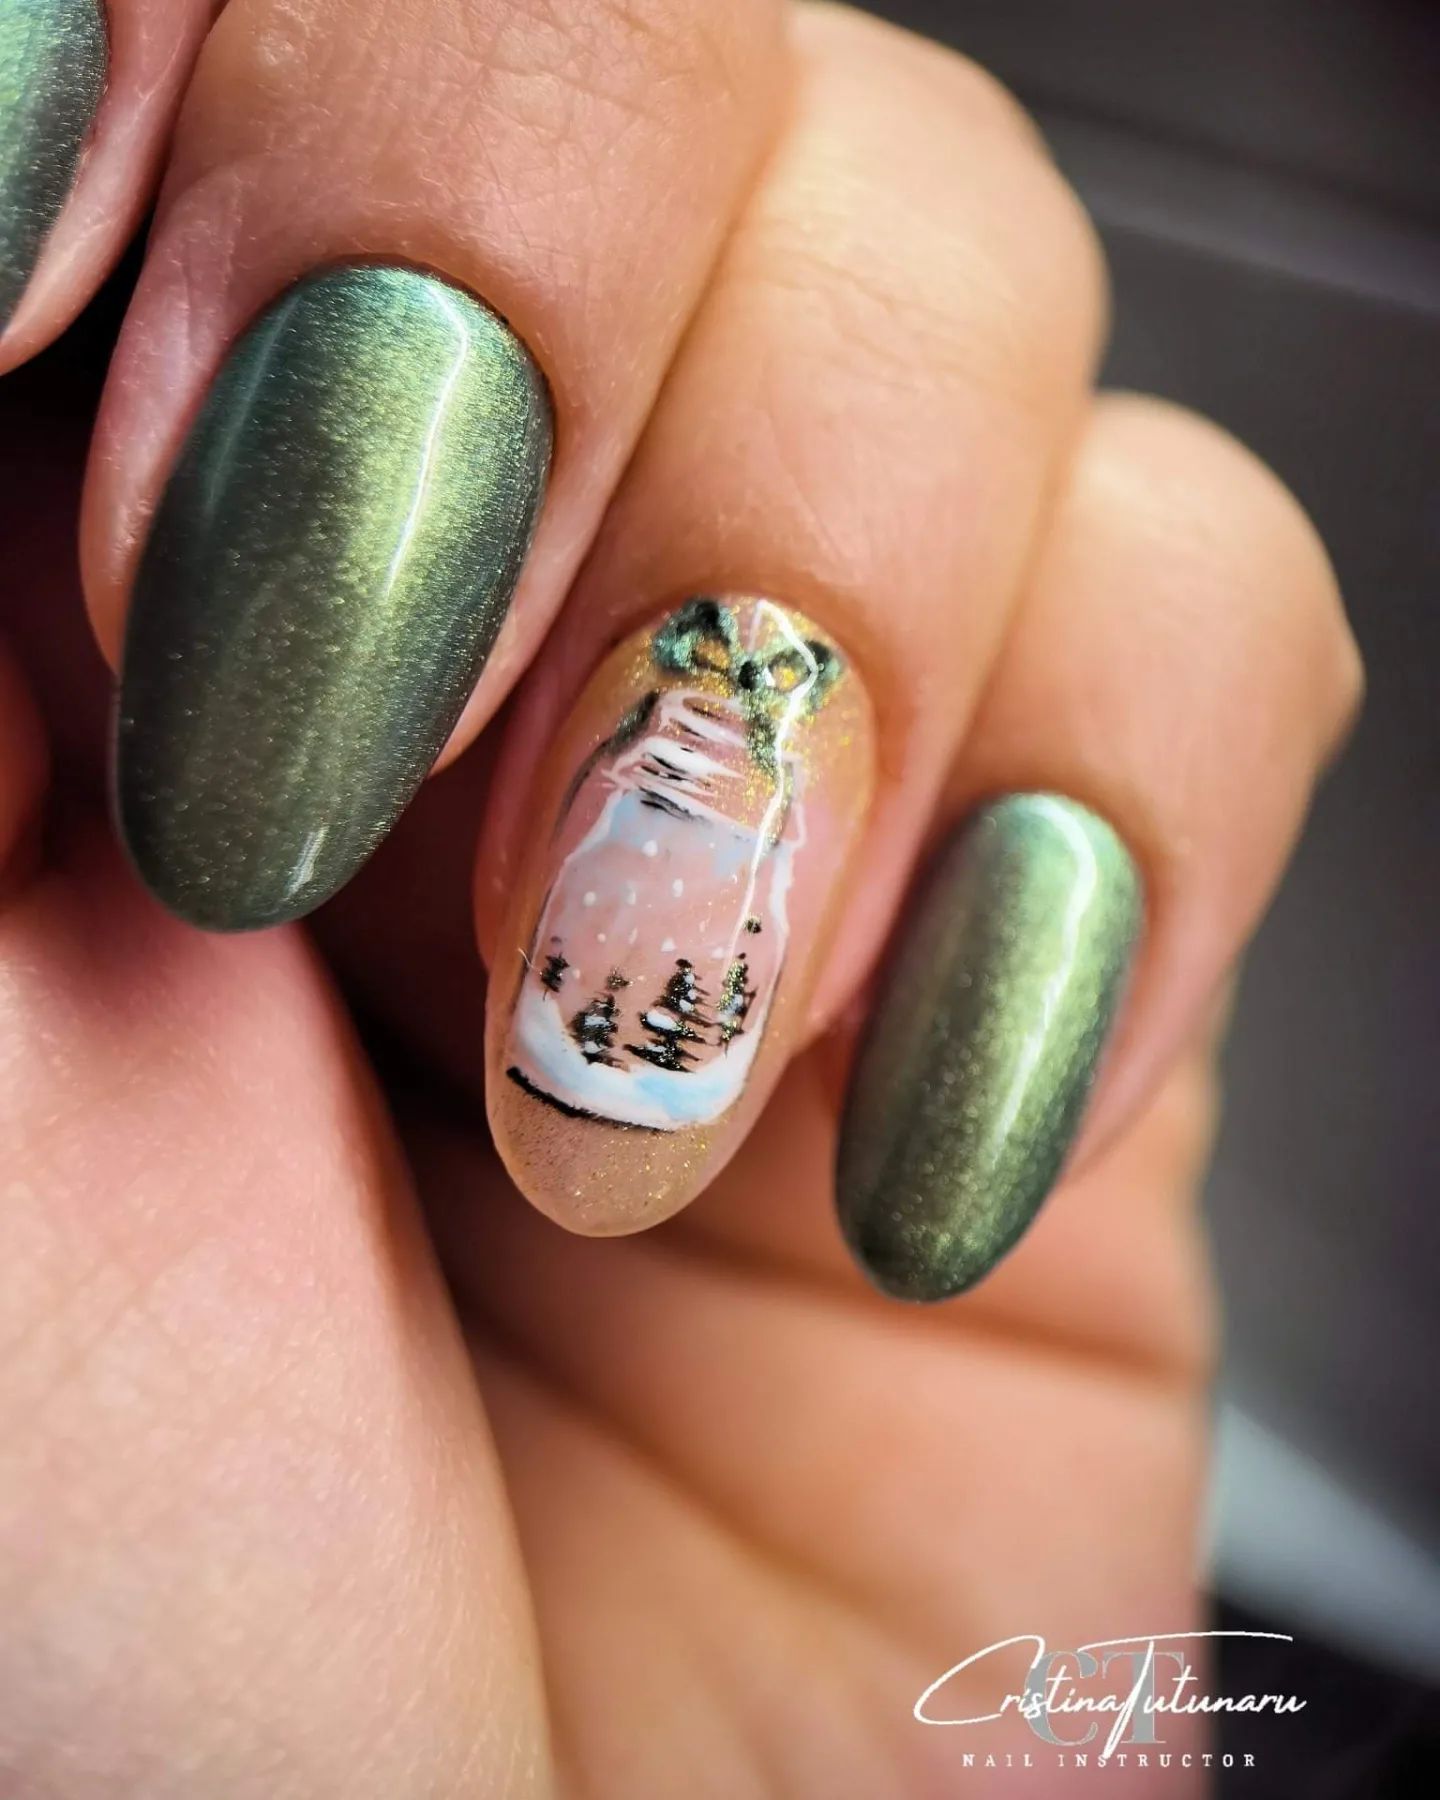 Mason jar snow globes are the perfect winter craft. In this jar, there are cute winter trees. Give this nail art a shot.